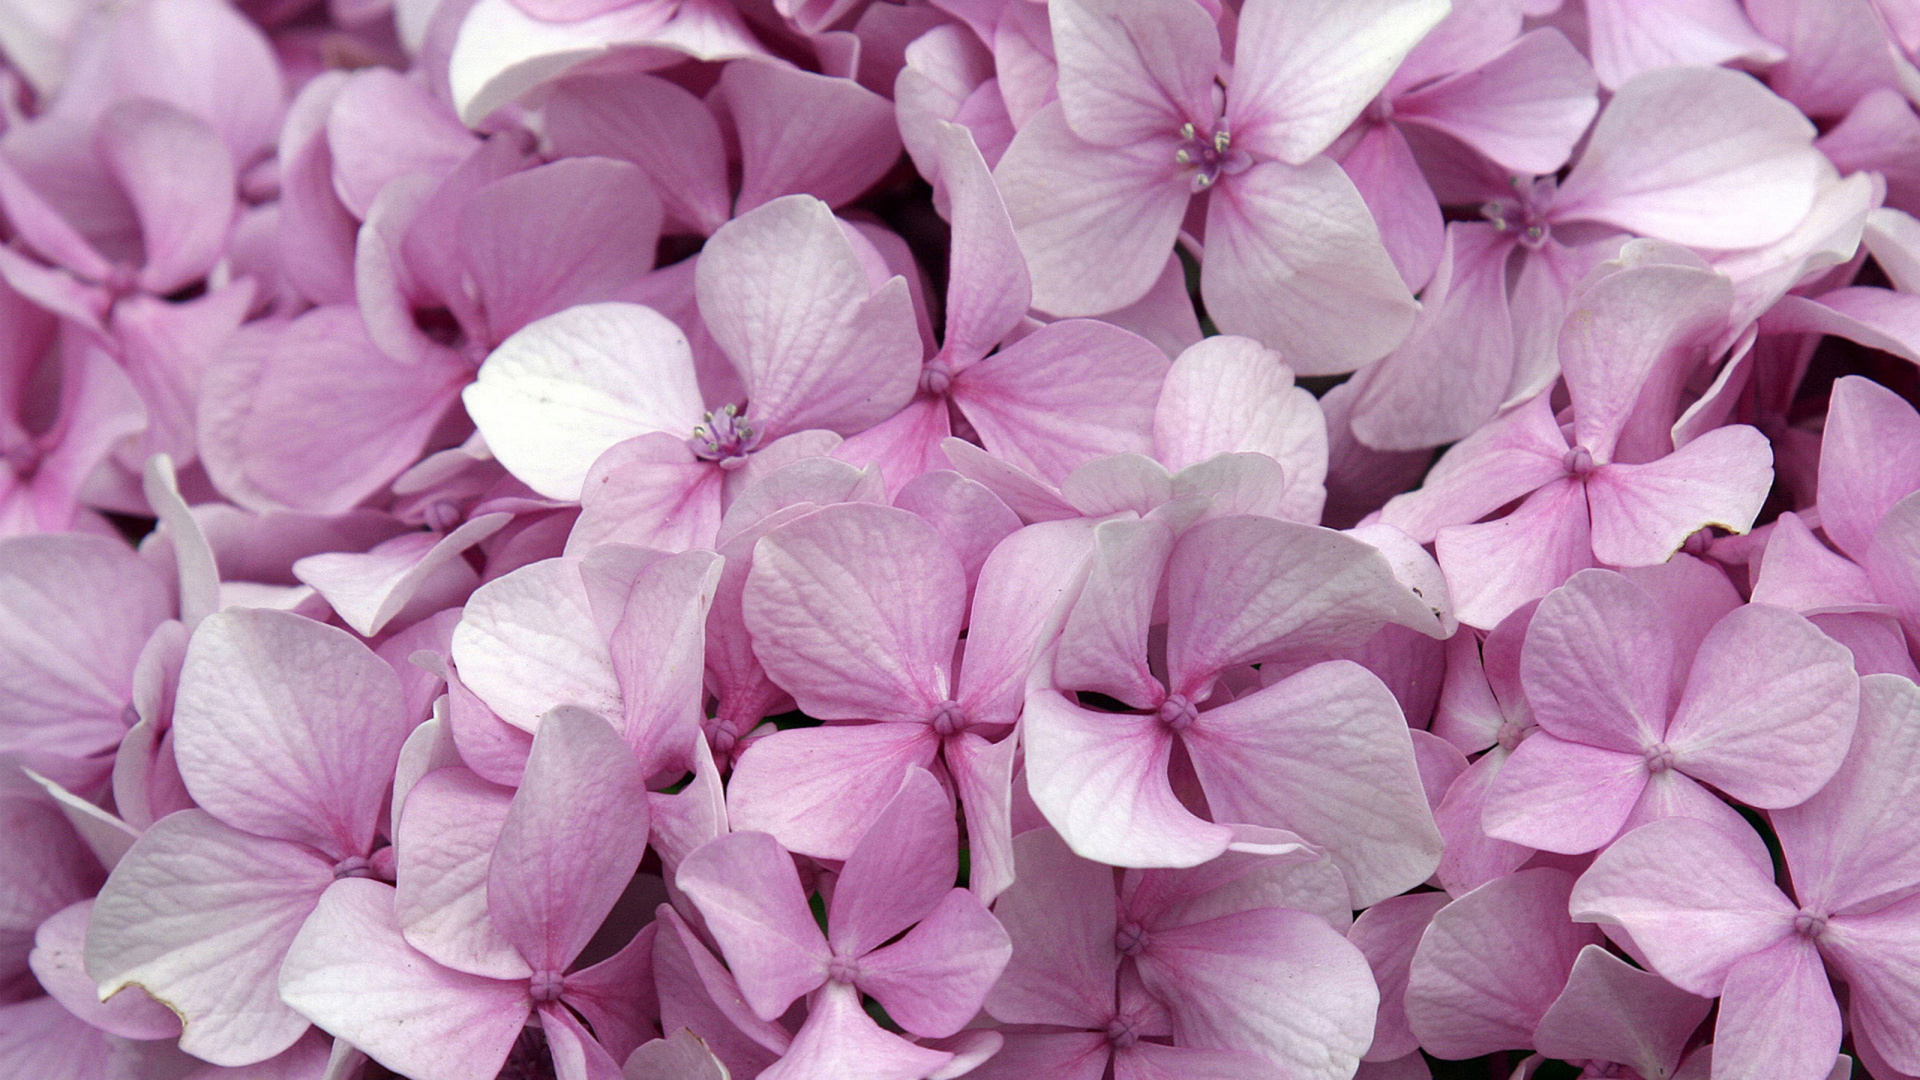 Pink and White Flower Petals. Wallpaper in 1920x1080 Resolution